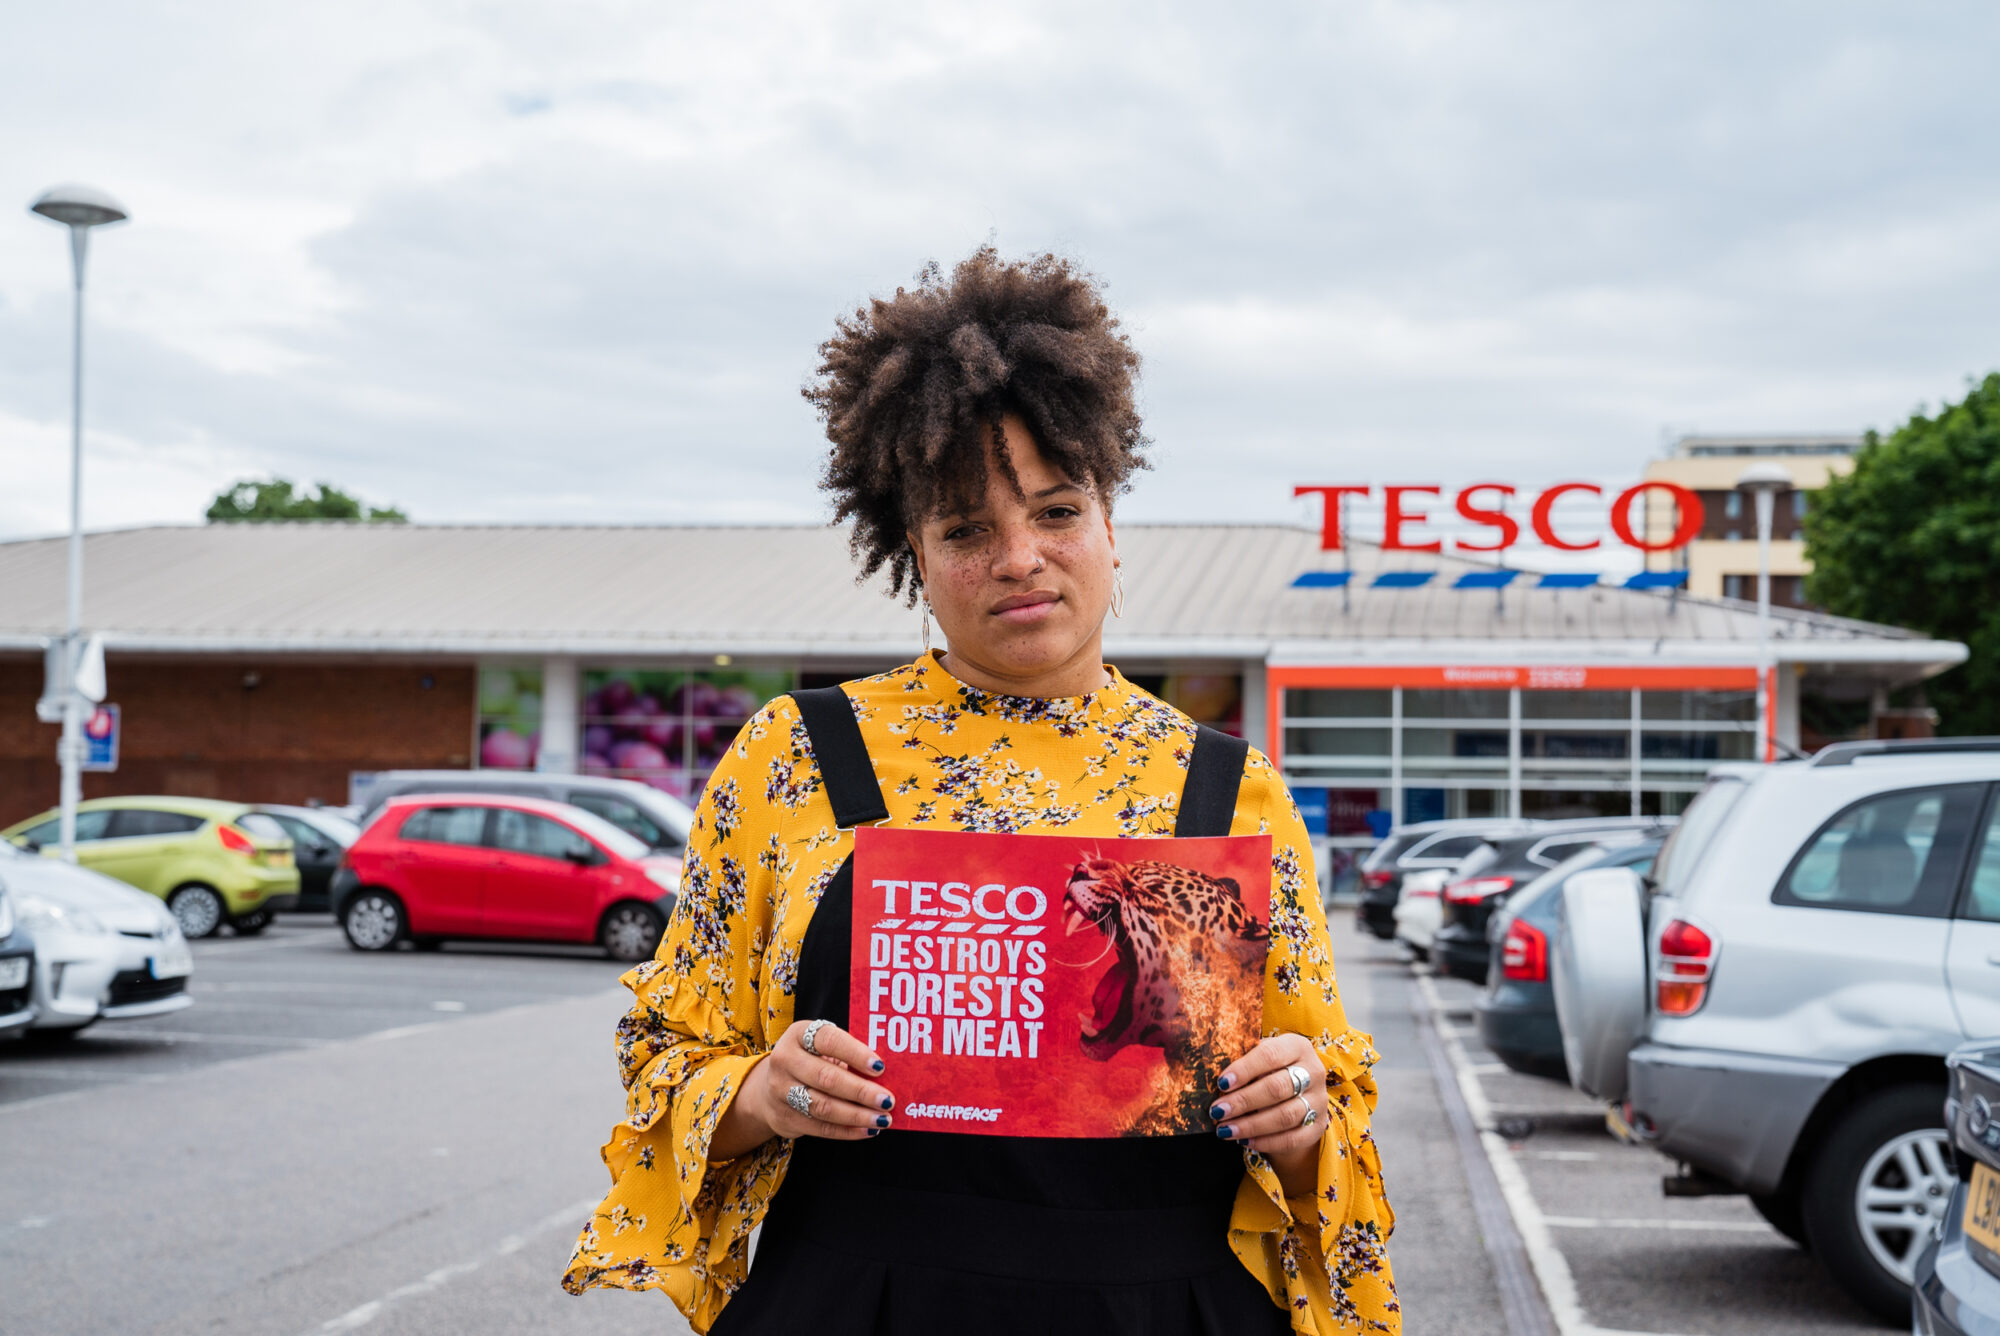 Laya Lewis stands outside the supermarket, Tesco, holding a sign that says "Tesco destroys forests for meat"